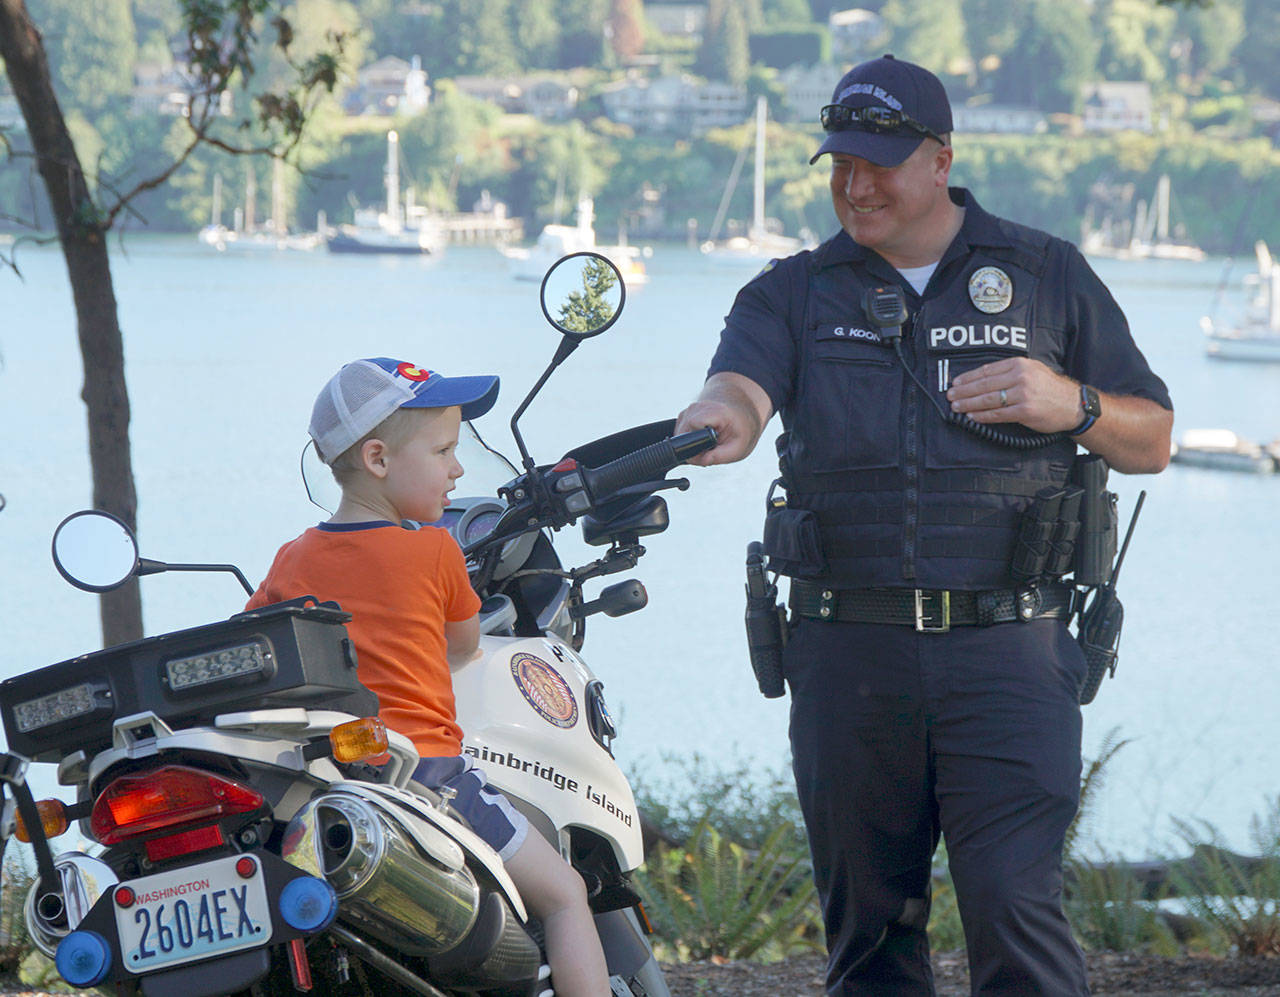 Luciano Marano | Bainbridge Island Review - Bainbridge Island Police Department Officer Gary Koon gives a young attendee a chance to sit on his bike during last year’s National Night Out event in Waterfront Park.